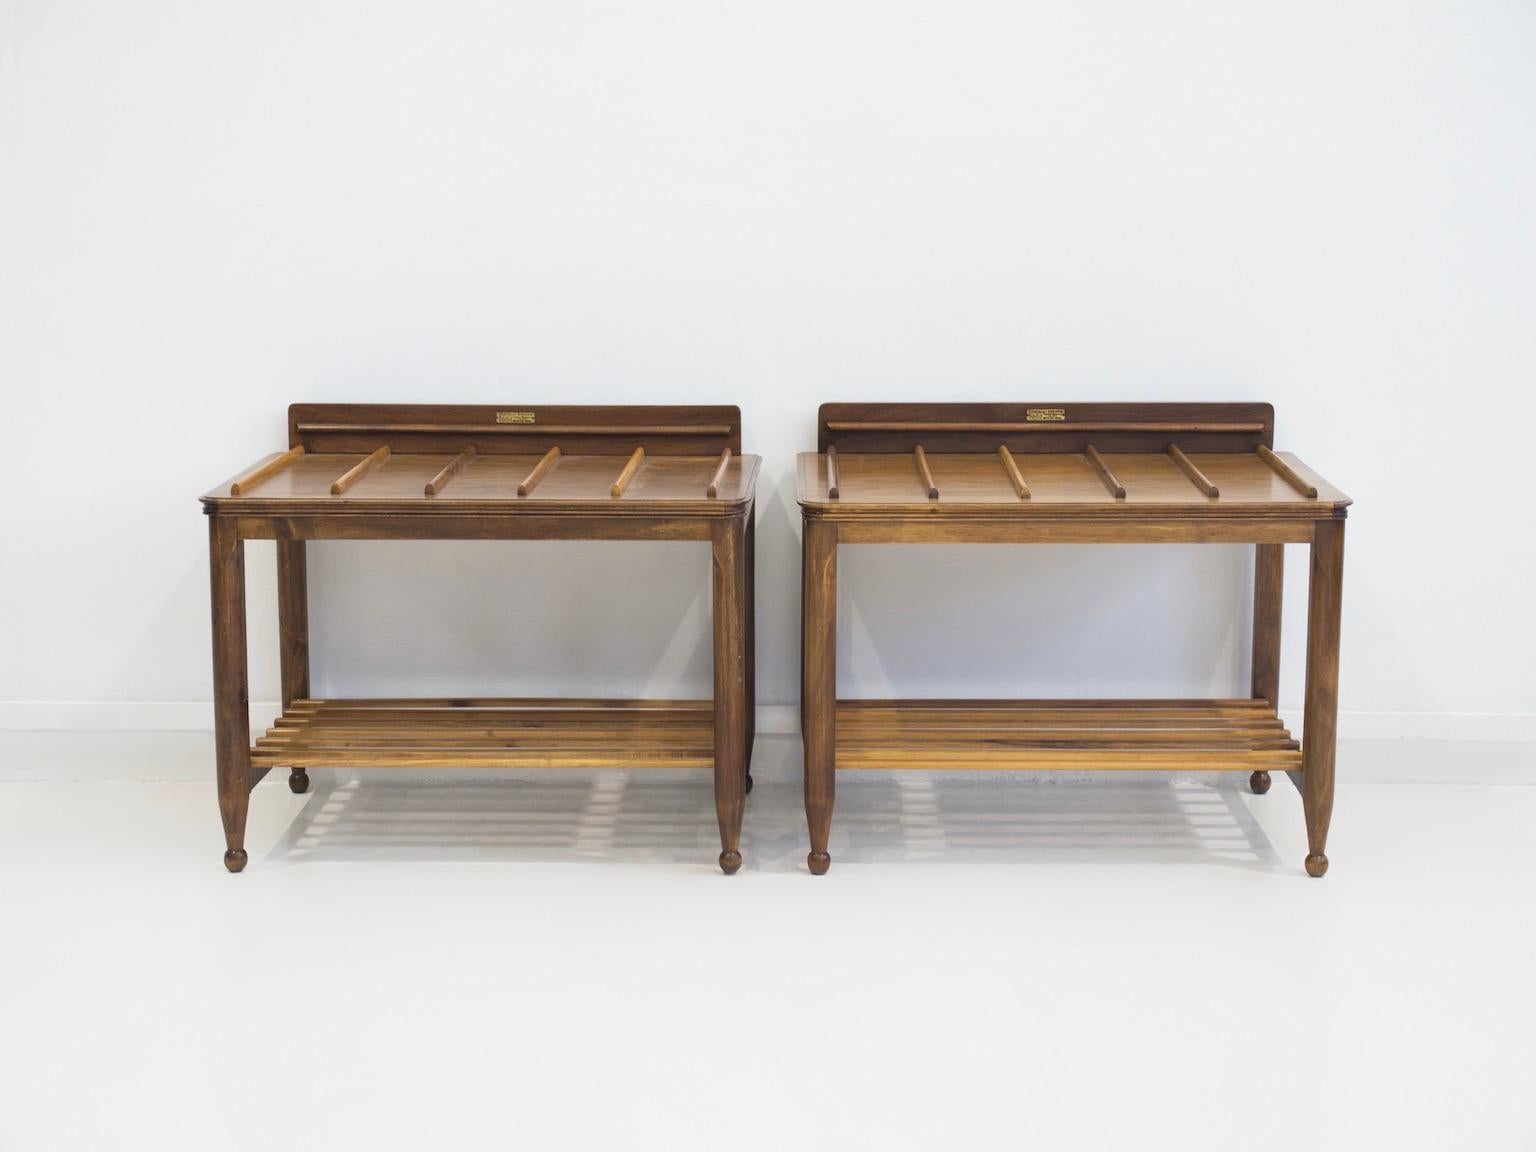 Two luggage racks from the 1960s. Made of lacquered wood. Manufactured and labeled by Fratelli Strada.